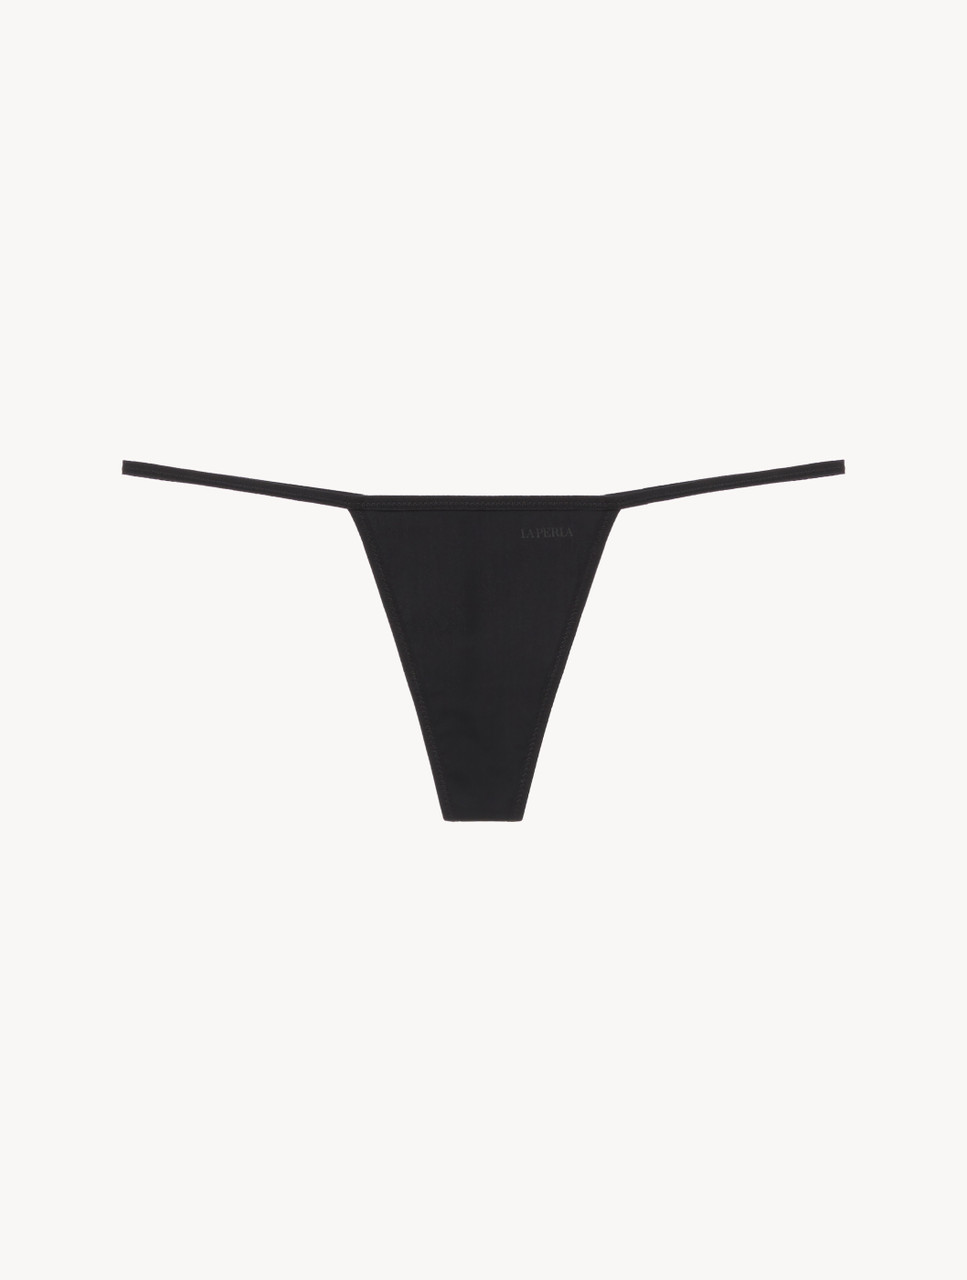 The Invisible High Waist G-String Brief